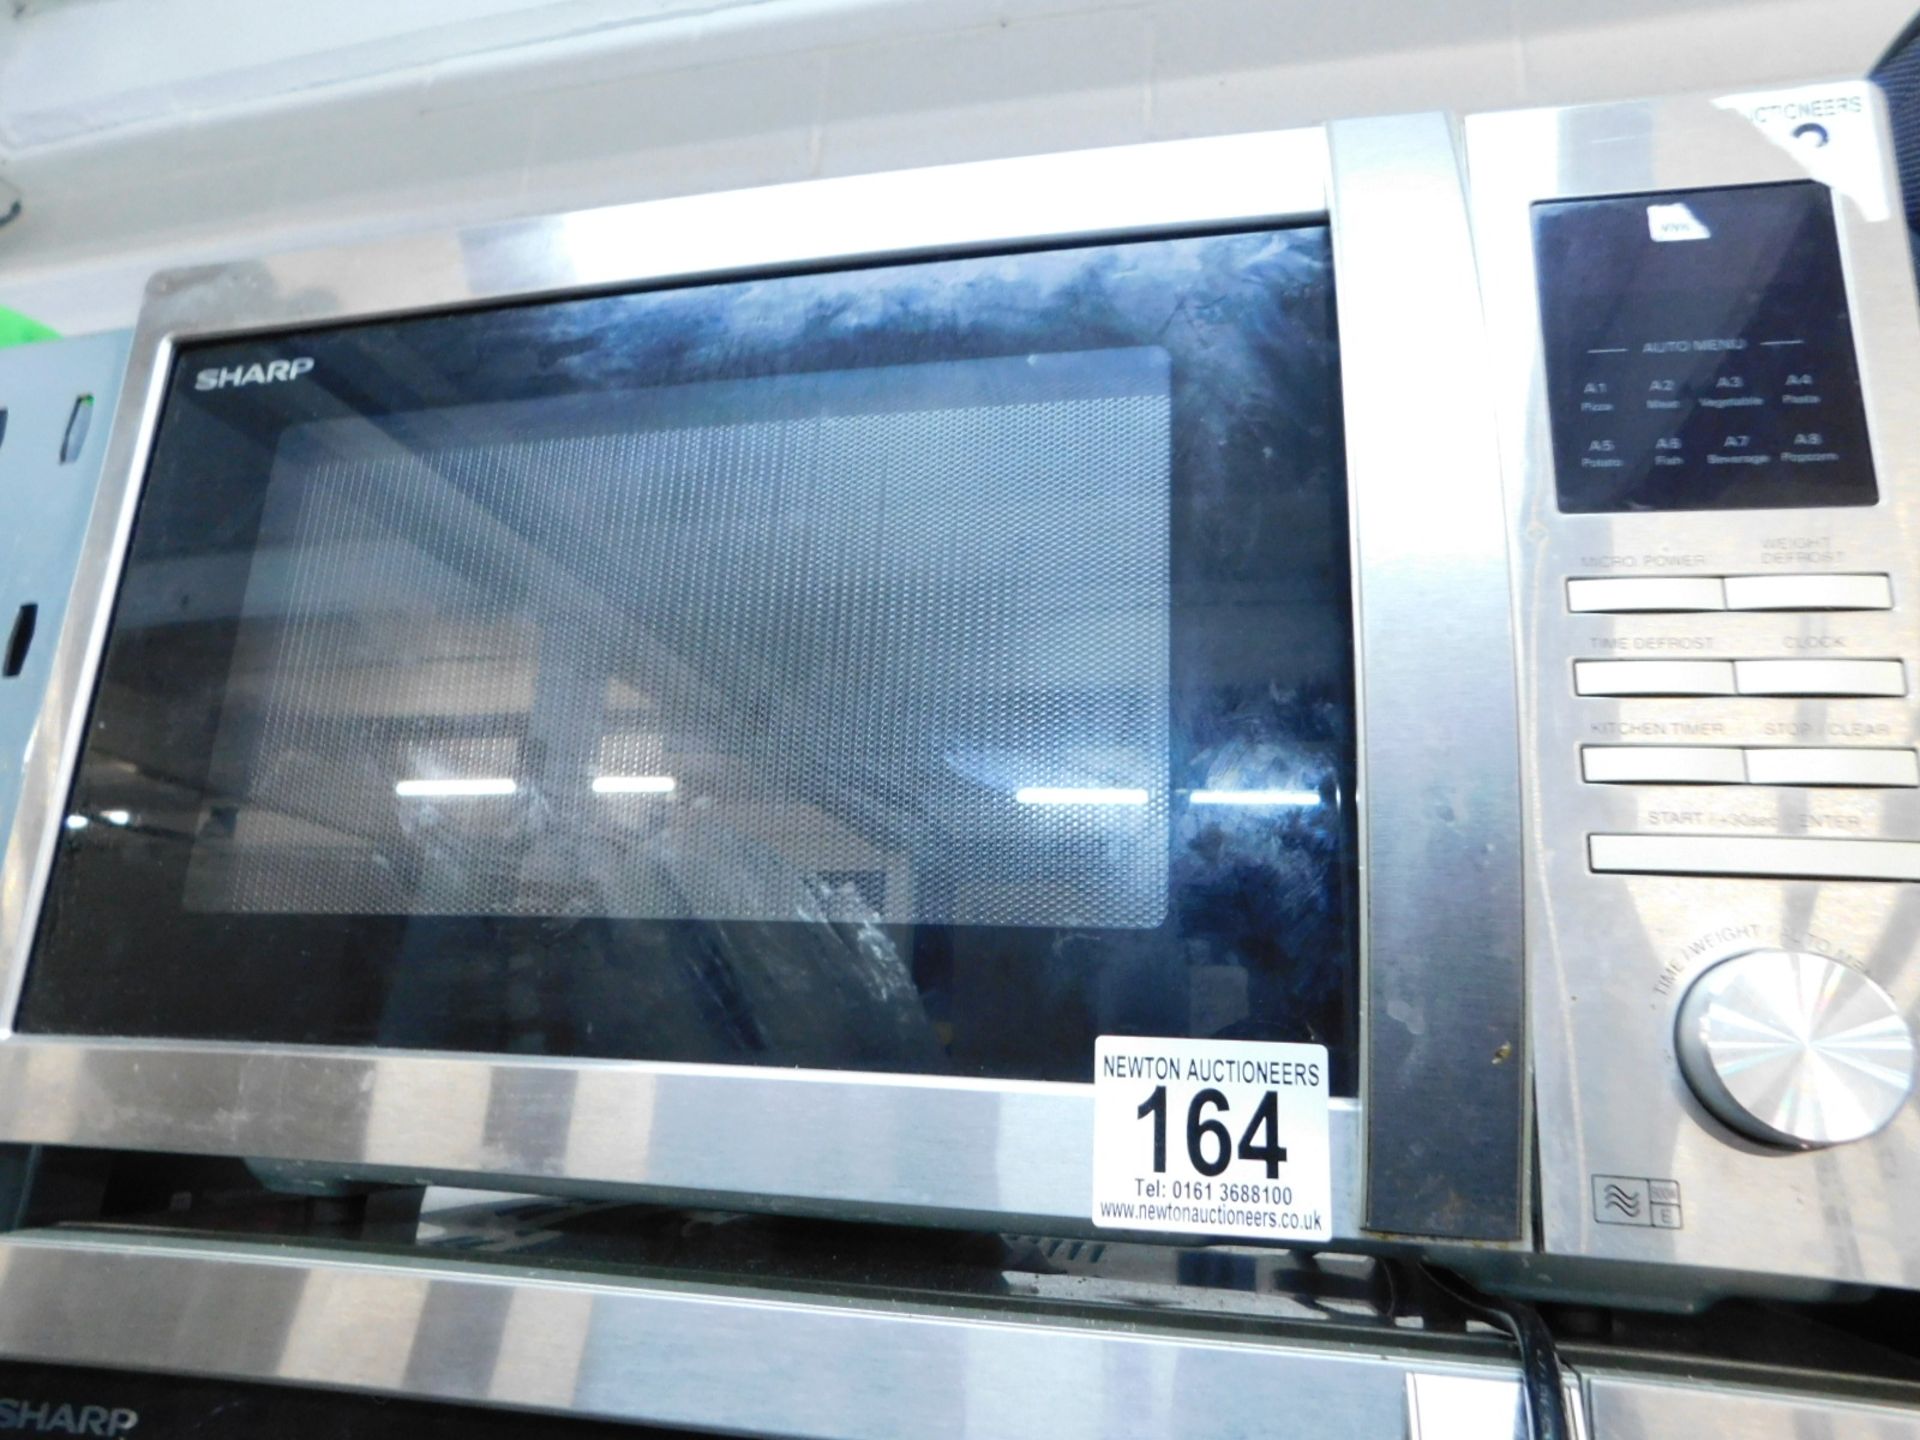 1 SHARP R-322STM 25L STAINLESS STEEL SOLO MICROWAVE OVEN RRP Â£149.99